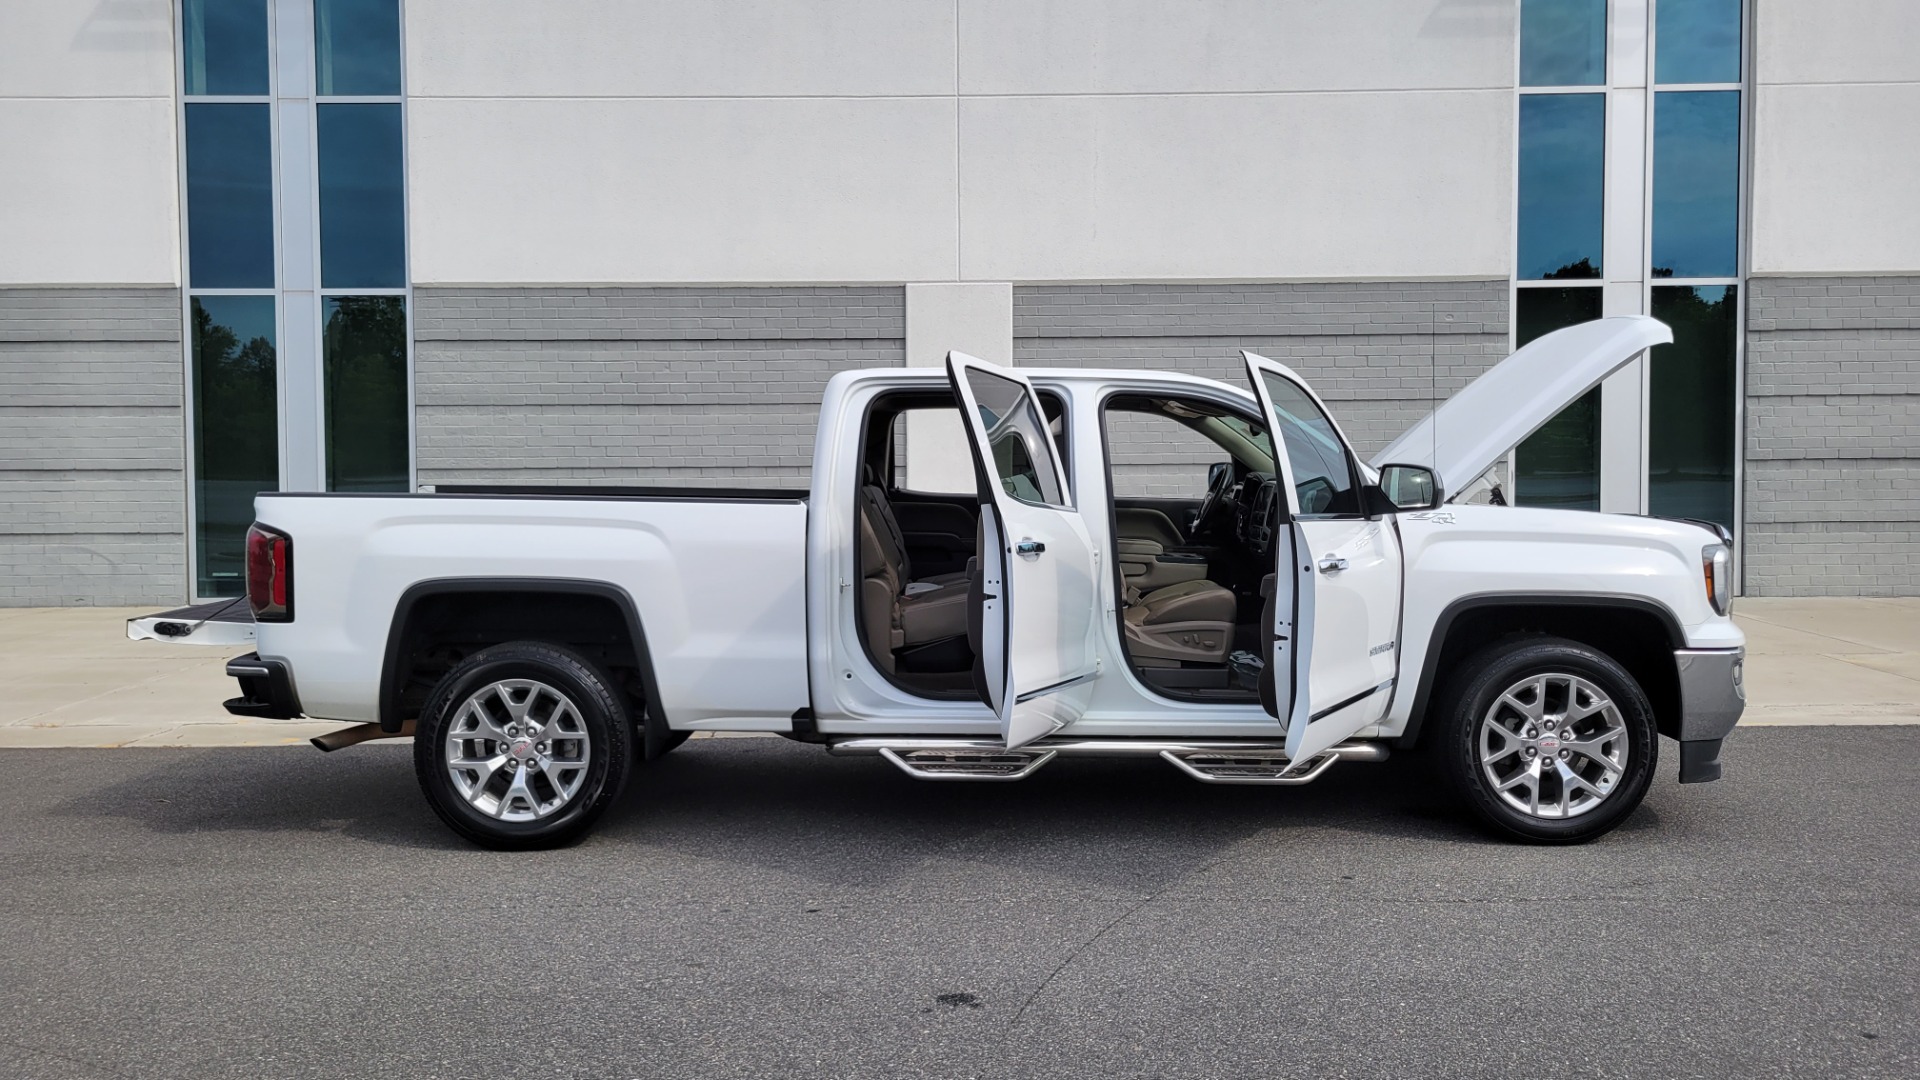 Used 2016 GMC SIERRA 1500 SLT 4X4 Z71 CREWCAB / NAV / BOSE / HTS STS & STRNG WHL / CAMERA for sale $29,695 at Formula Imports in Charlotte NC 28227 15